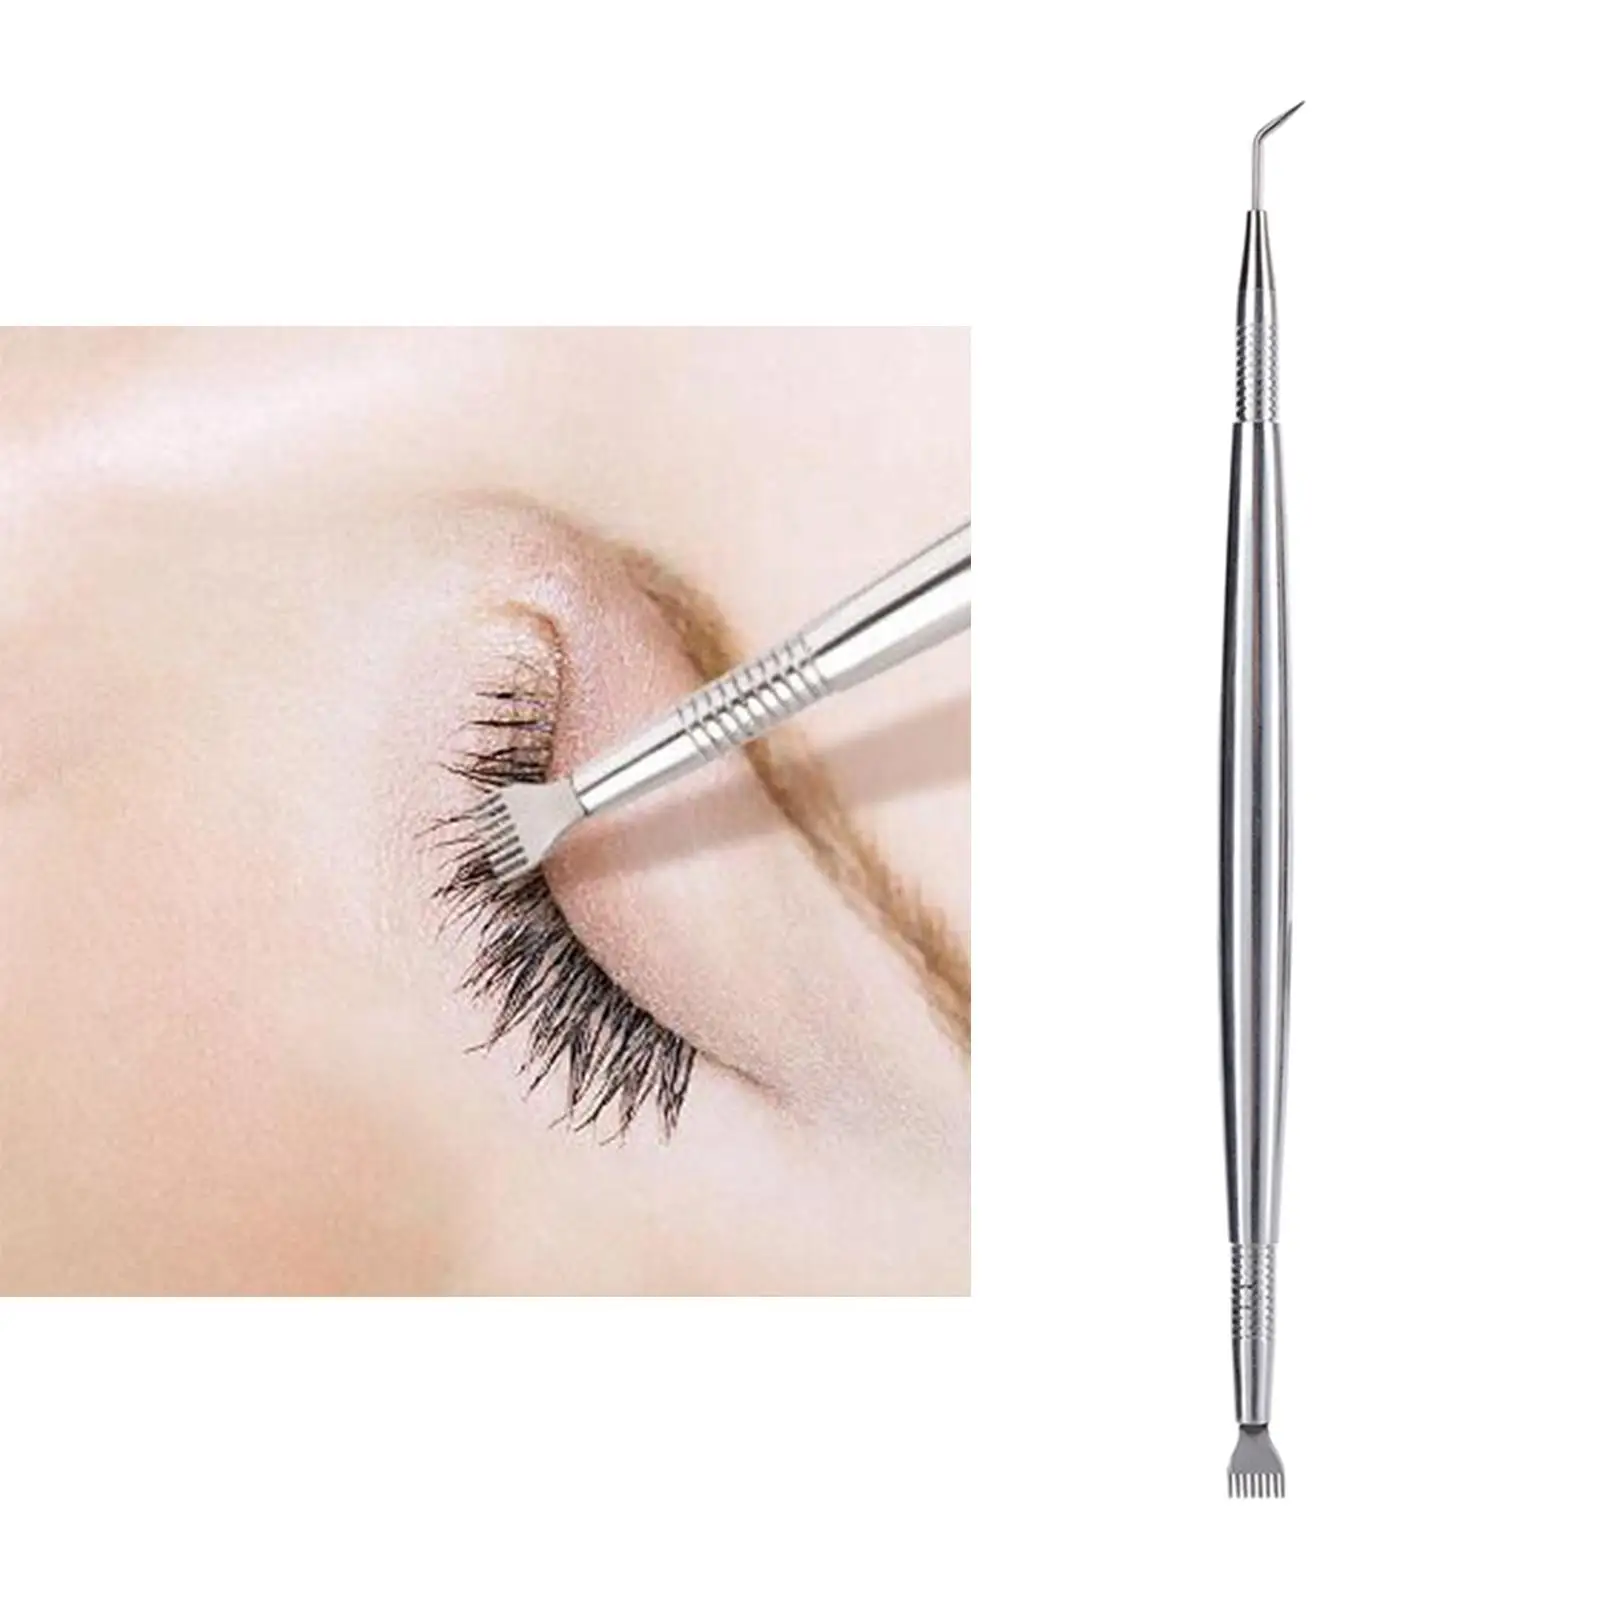 Eyelashes Seperator Lashes Separater Perm Tool for Beginner Tinting Lifter Stainless Steel Extensions Supplies Lifting